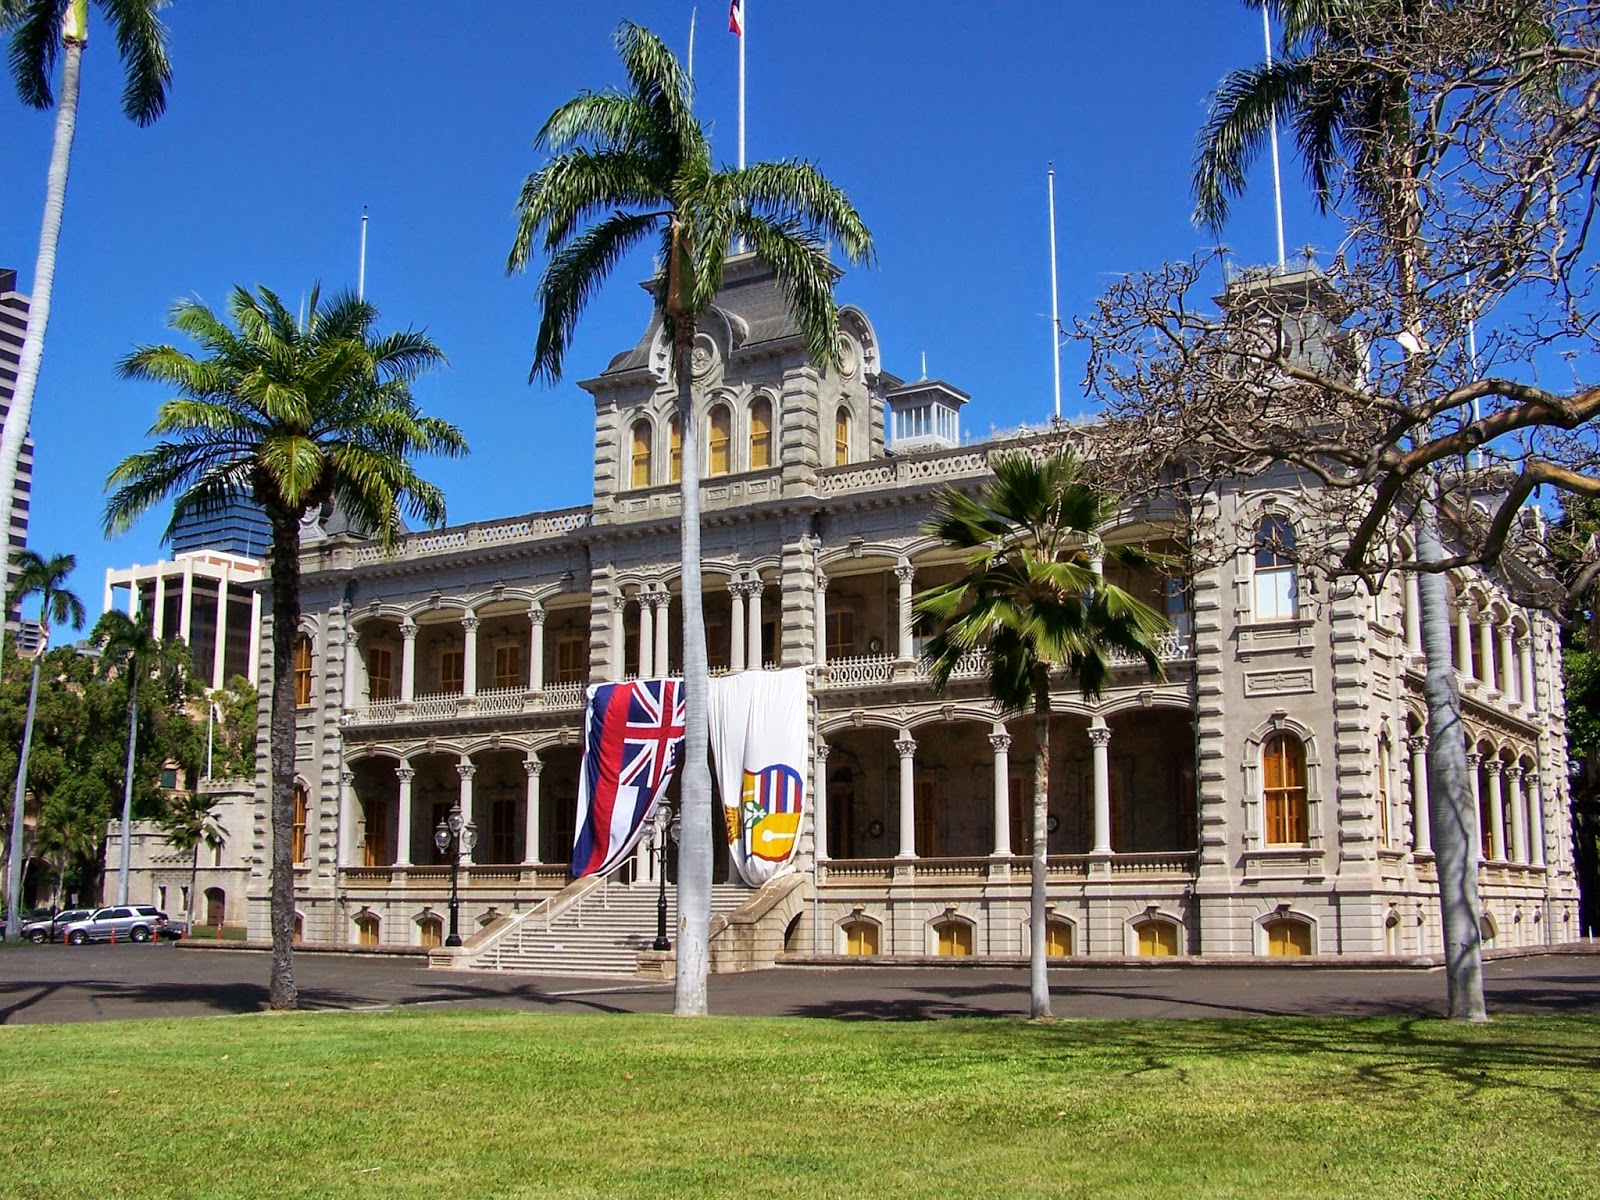 Iolani Palace with flags